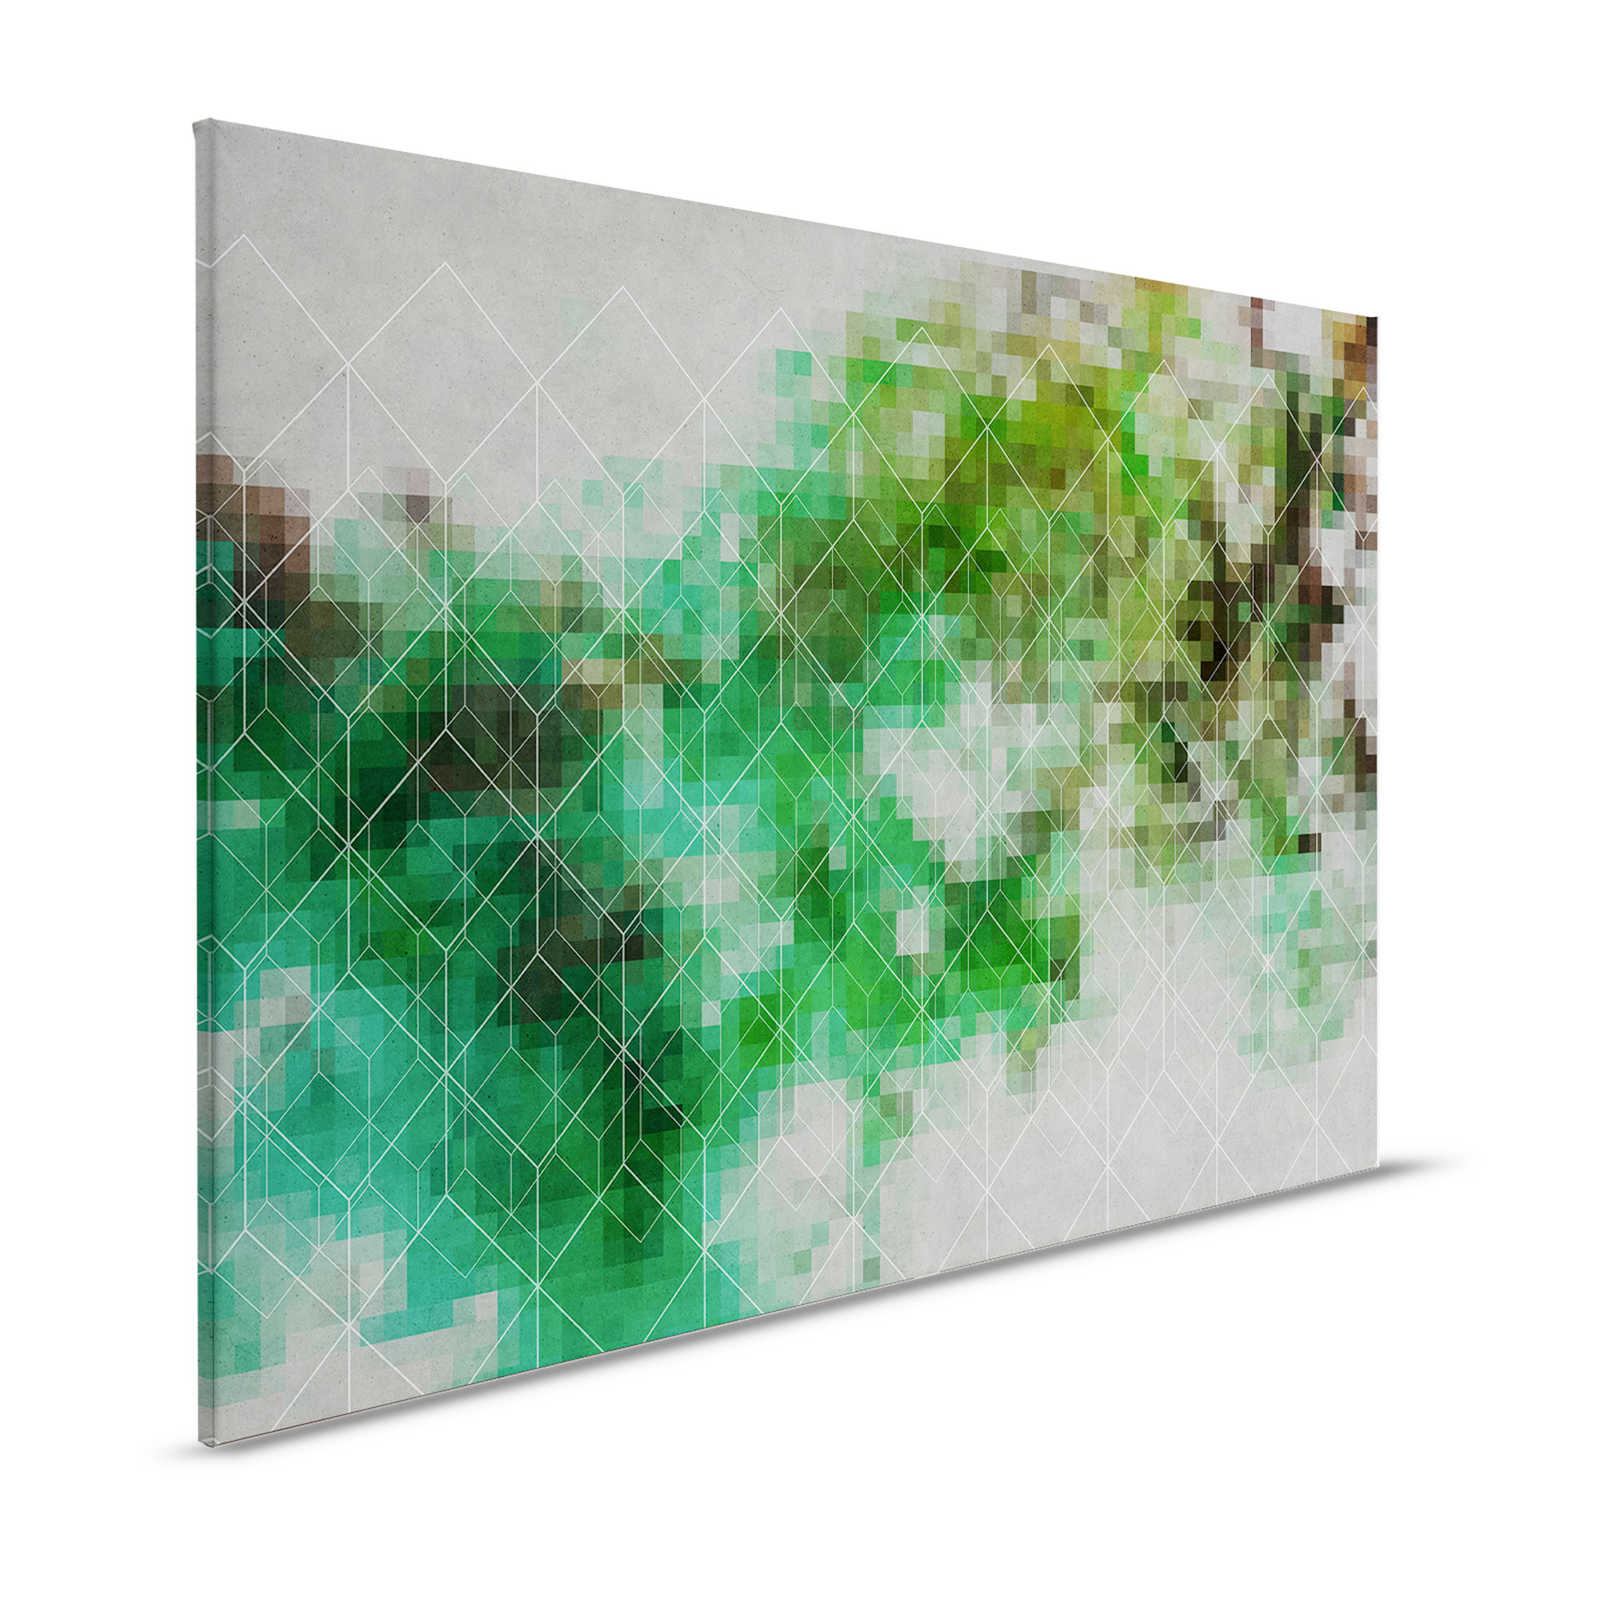 Canvas painting Colour Clouds & Line Patterns | green, grey - 1.20 m x 0.80 m
